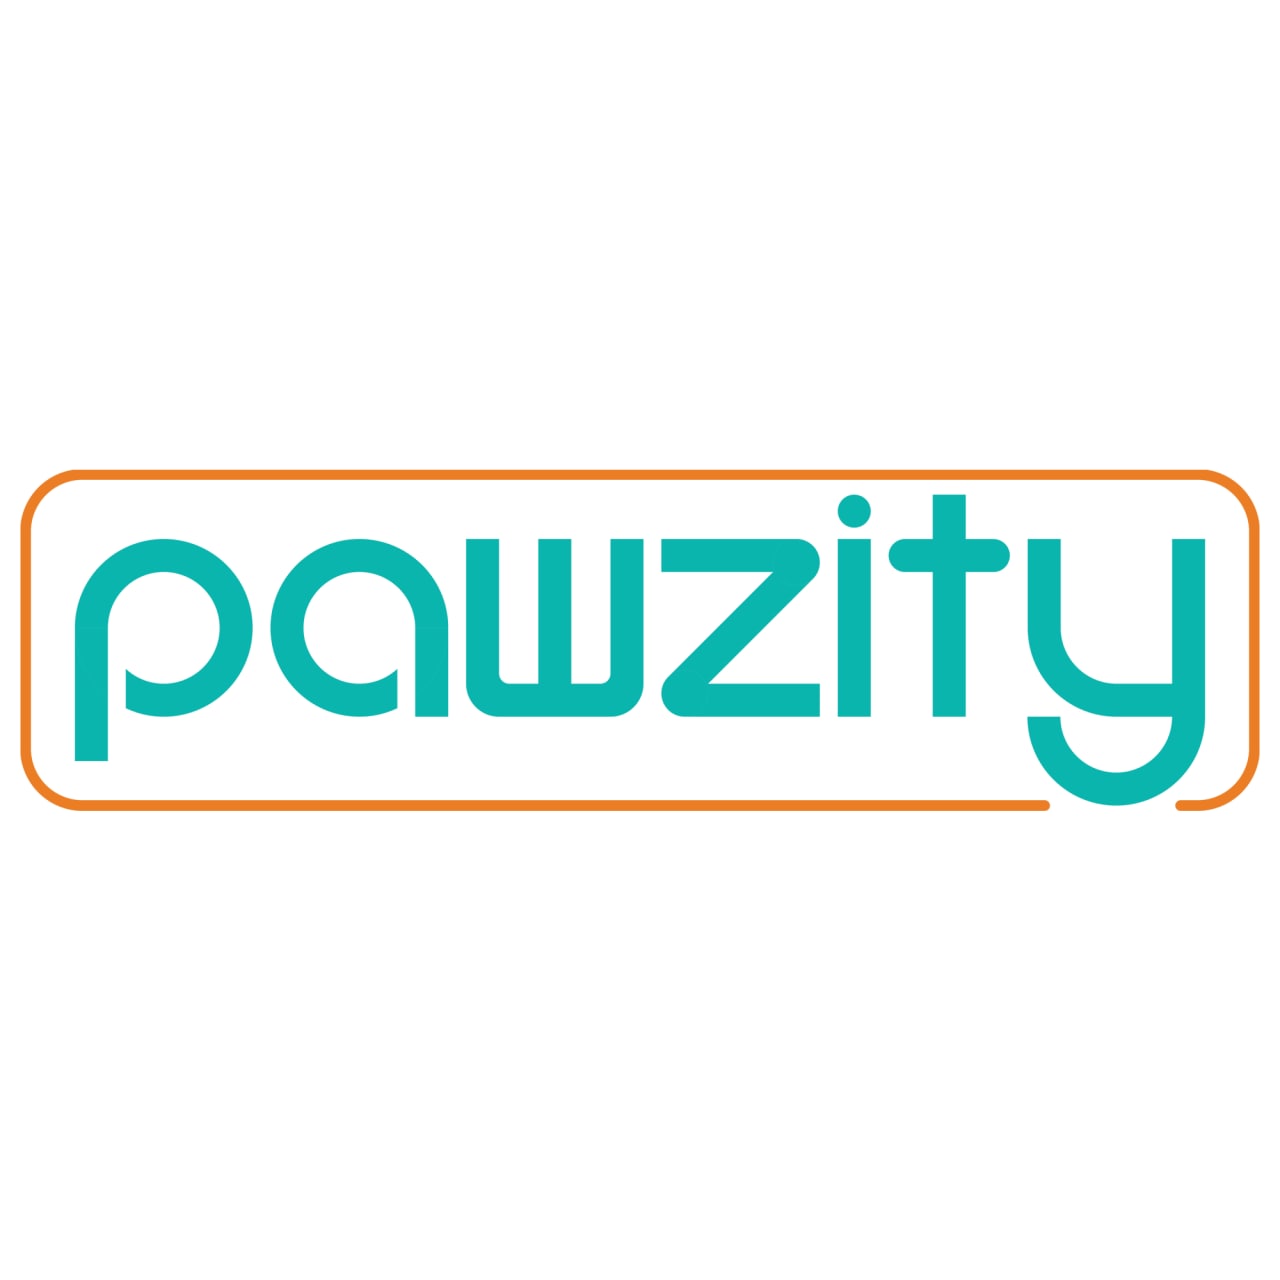 PAWZITY - PERSONALIZED GIFTS FOR YOUR LOVED ONES